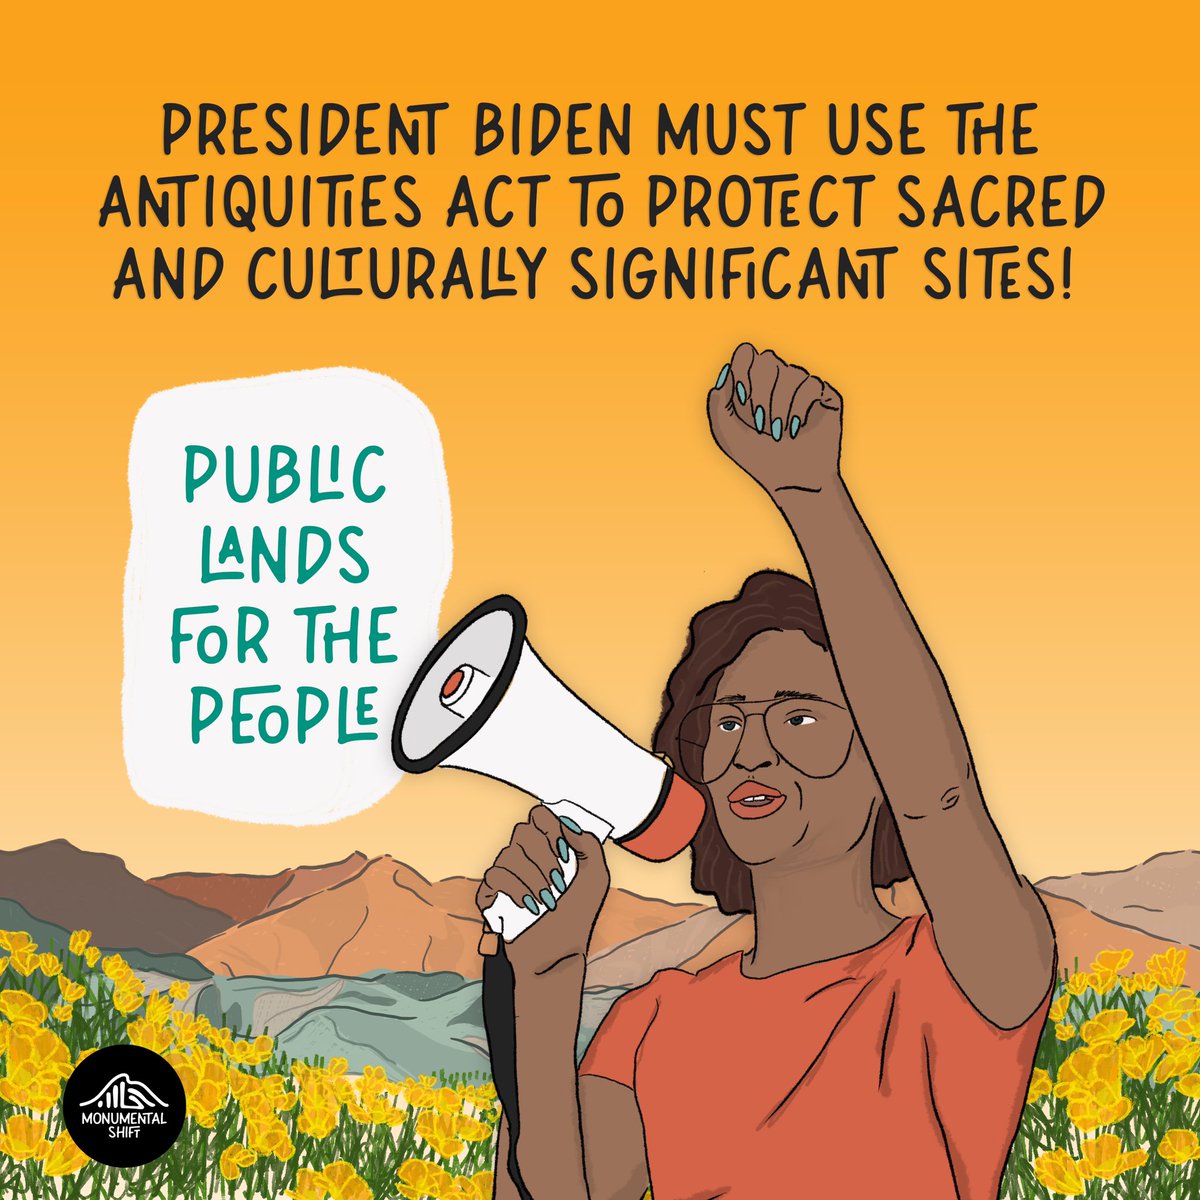 The preservation of lands through the #AntiquitiesAct ensures that we are deciding to protect sites for our people, our children, and the generations to come. Join us in calling on @POTUS to protect #CastnerRange and #AviKwaAme!